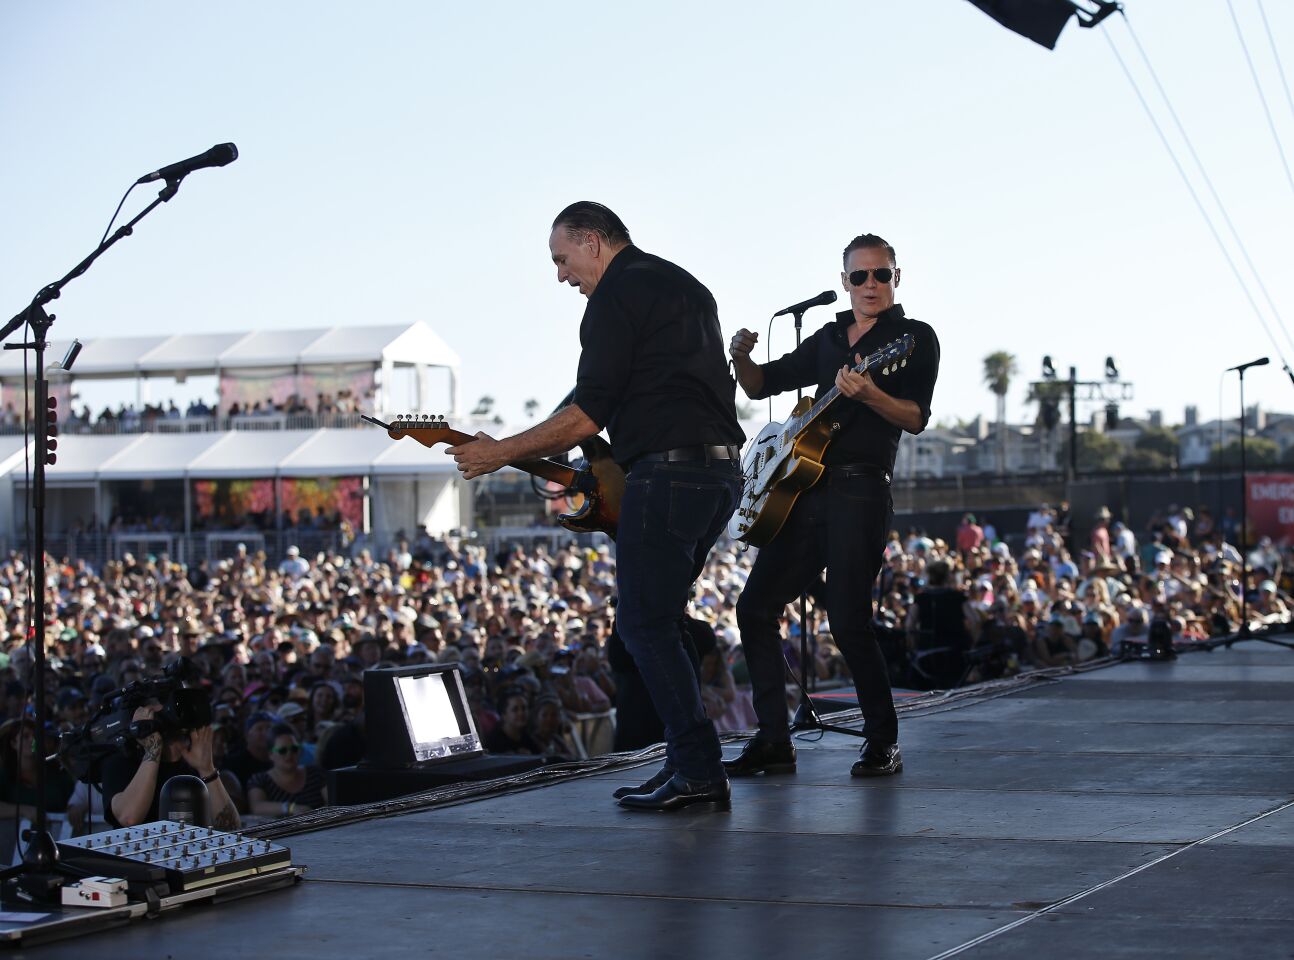 North County resident Keith Scott, left, plays guitar with Bryan Adams at the Sunset Cliffs stage at KAABOO Del Mar on Saturday, Sept. 14, 2019.